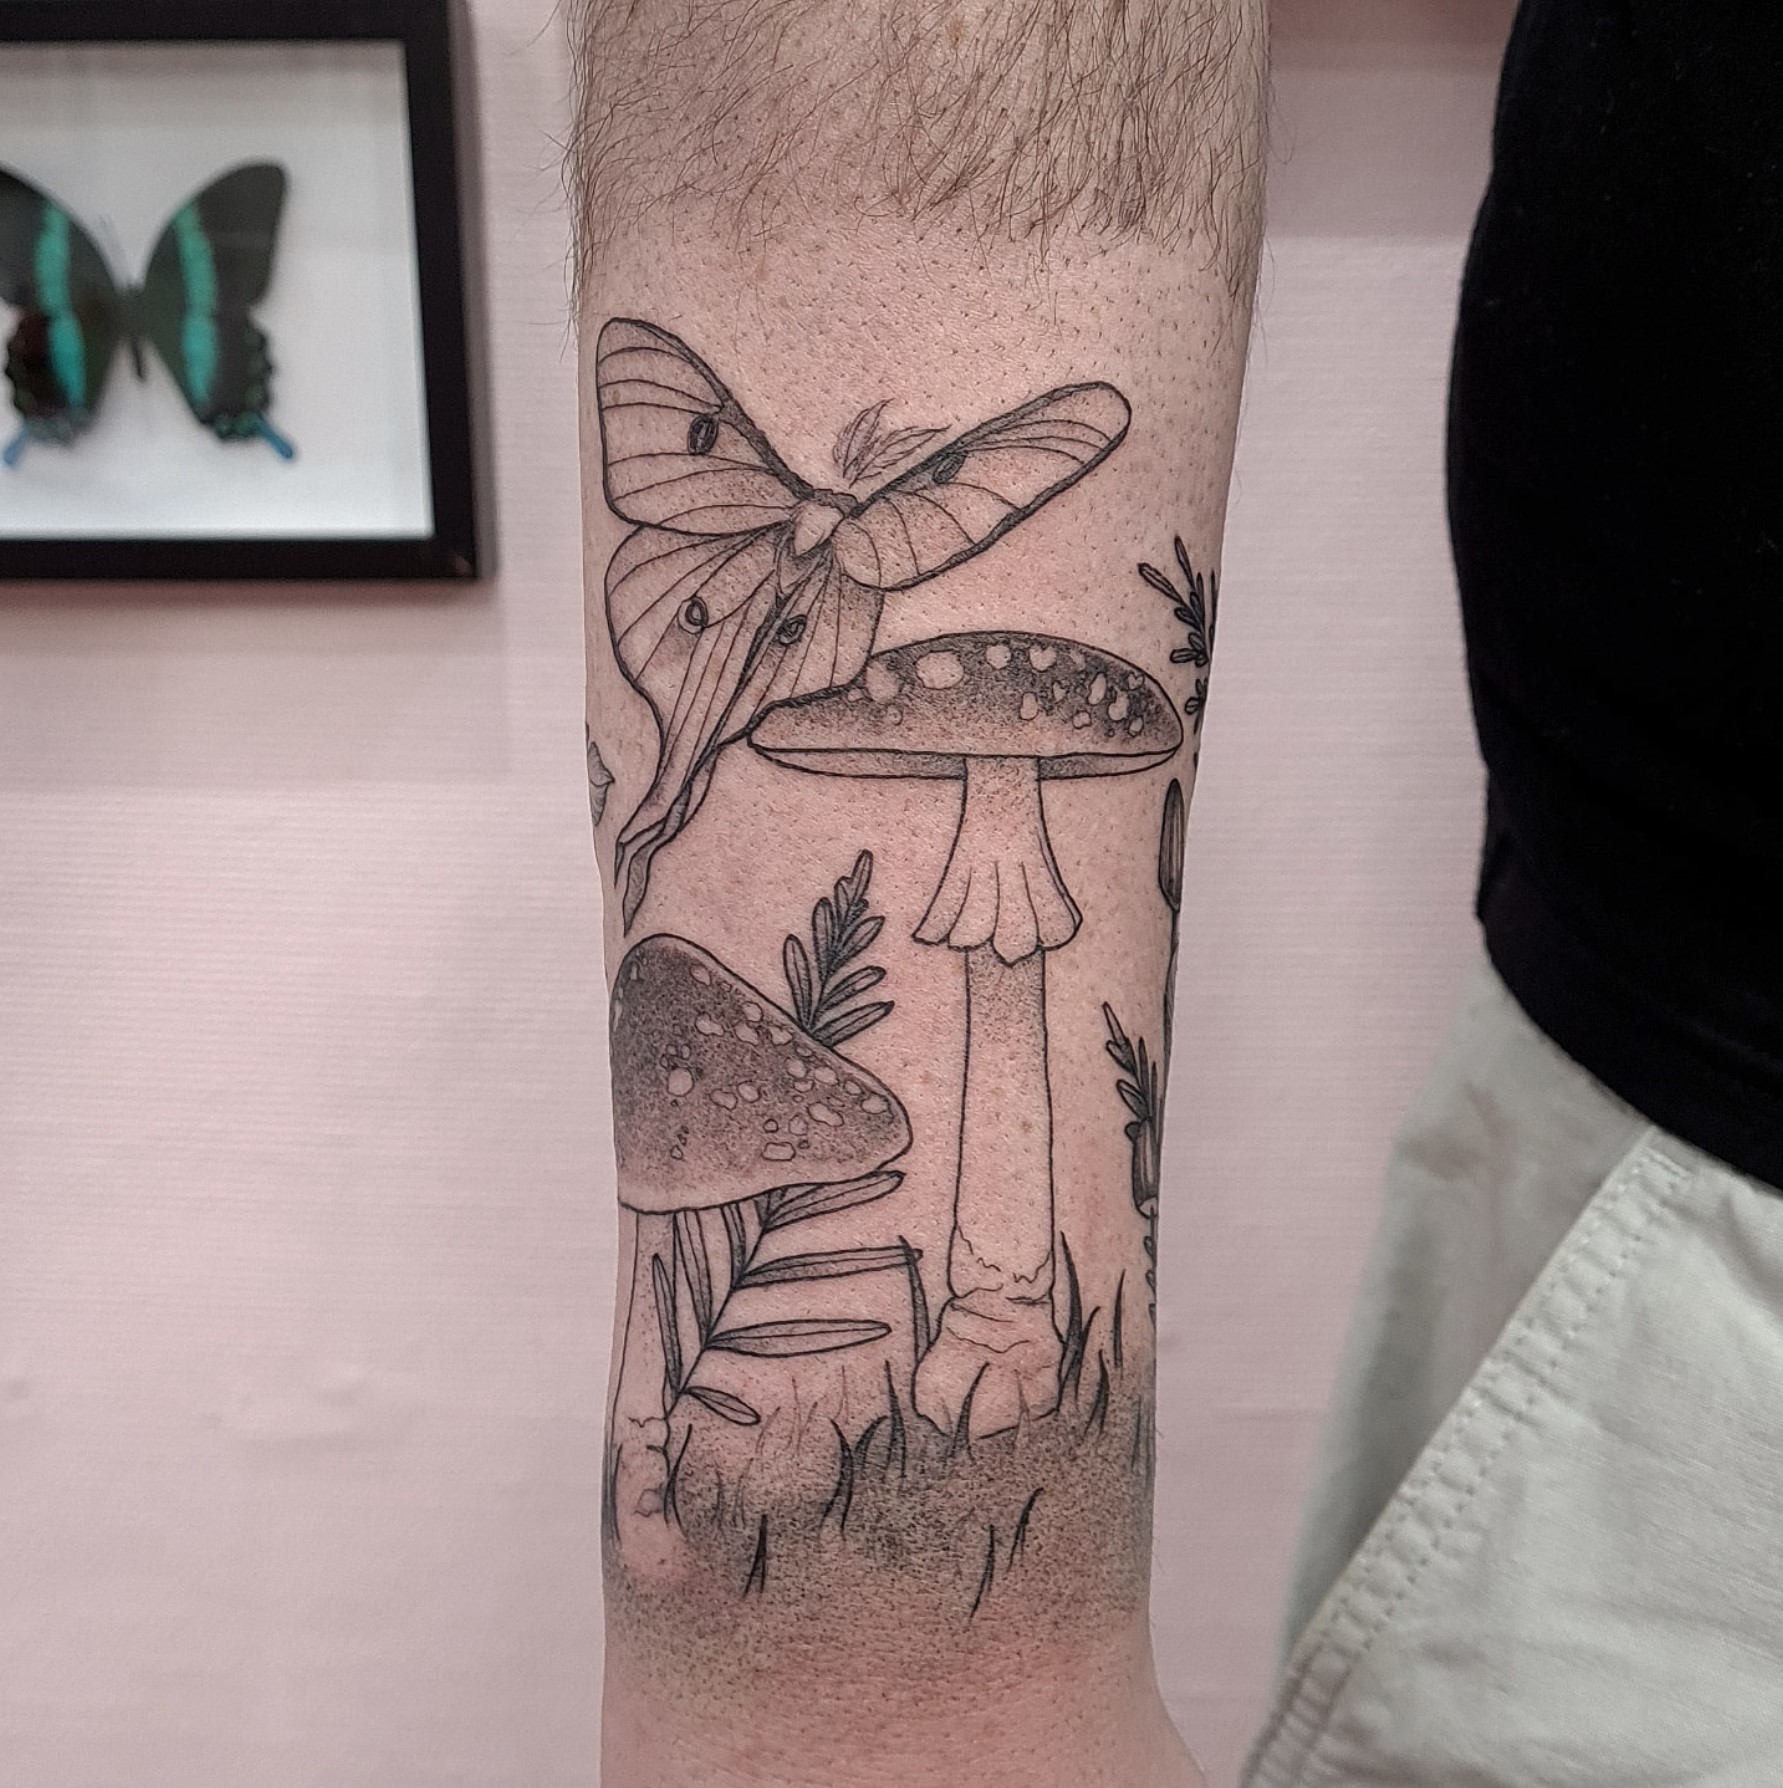 Butterfly and mushrooms tattoo